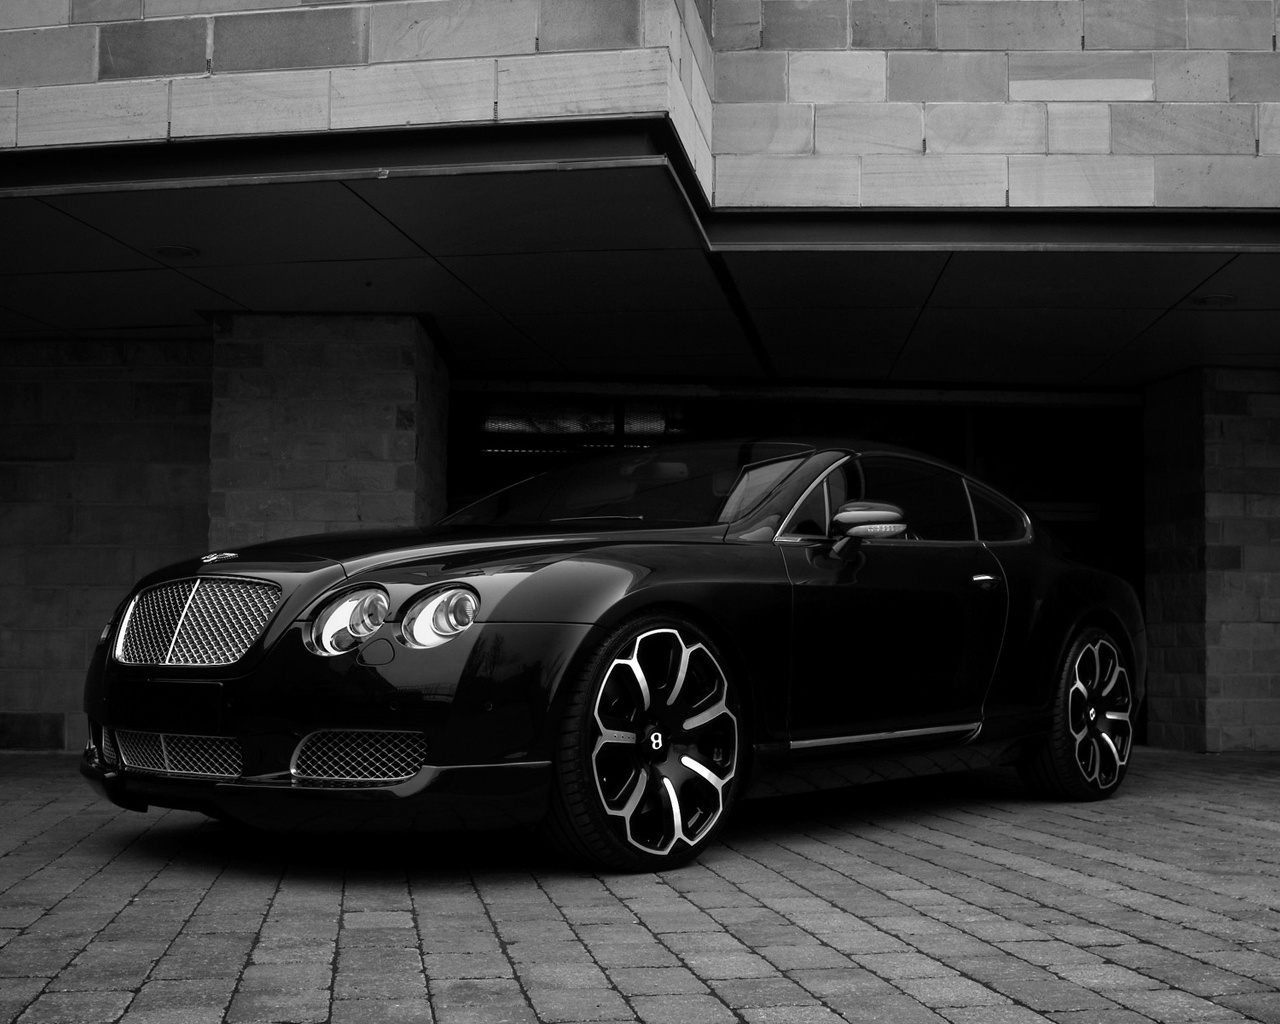 Bentley GTS Black Edition Project Kahn 2008 Overhang for 1280 x 1024 resolution